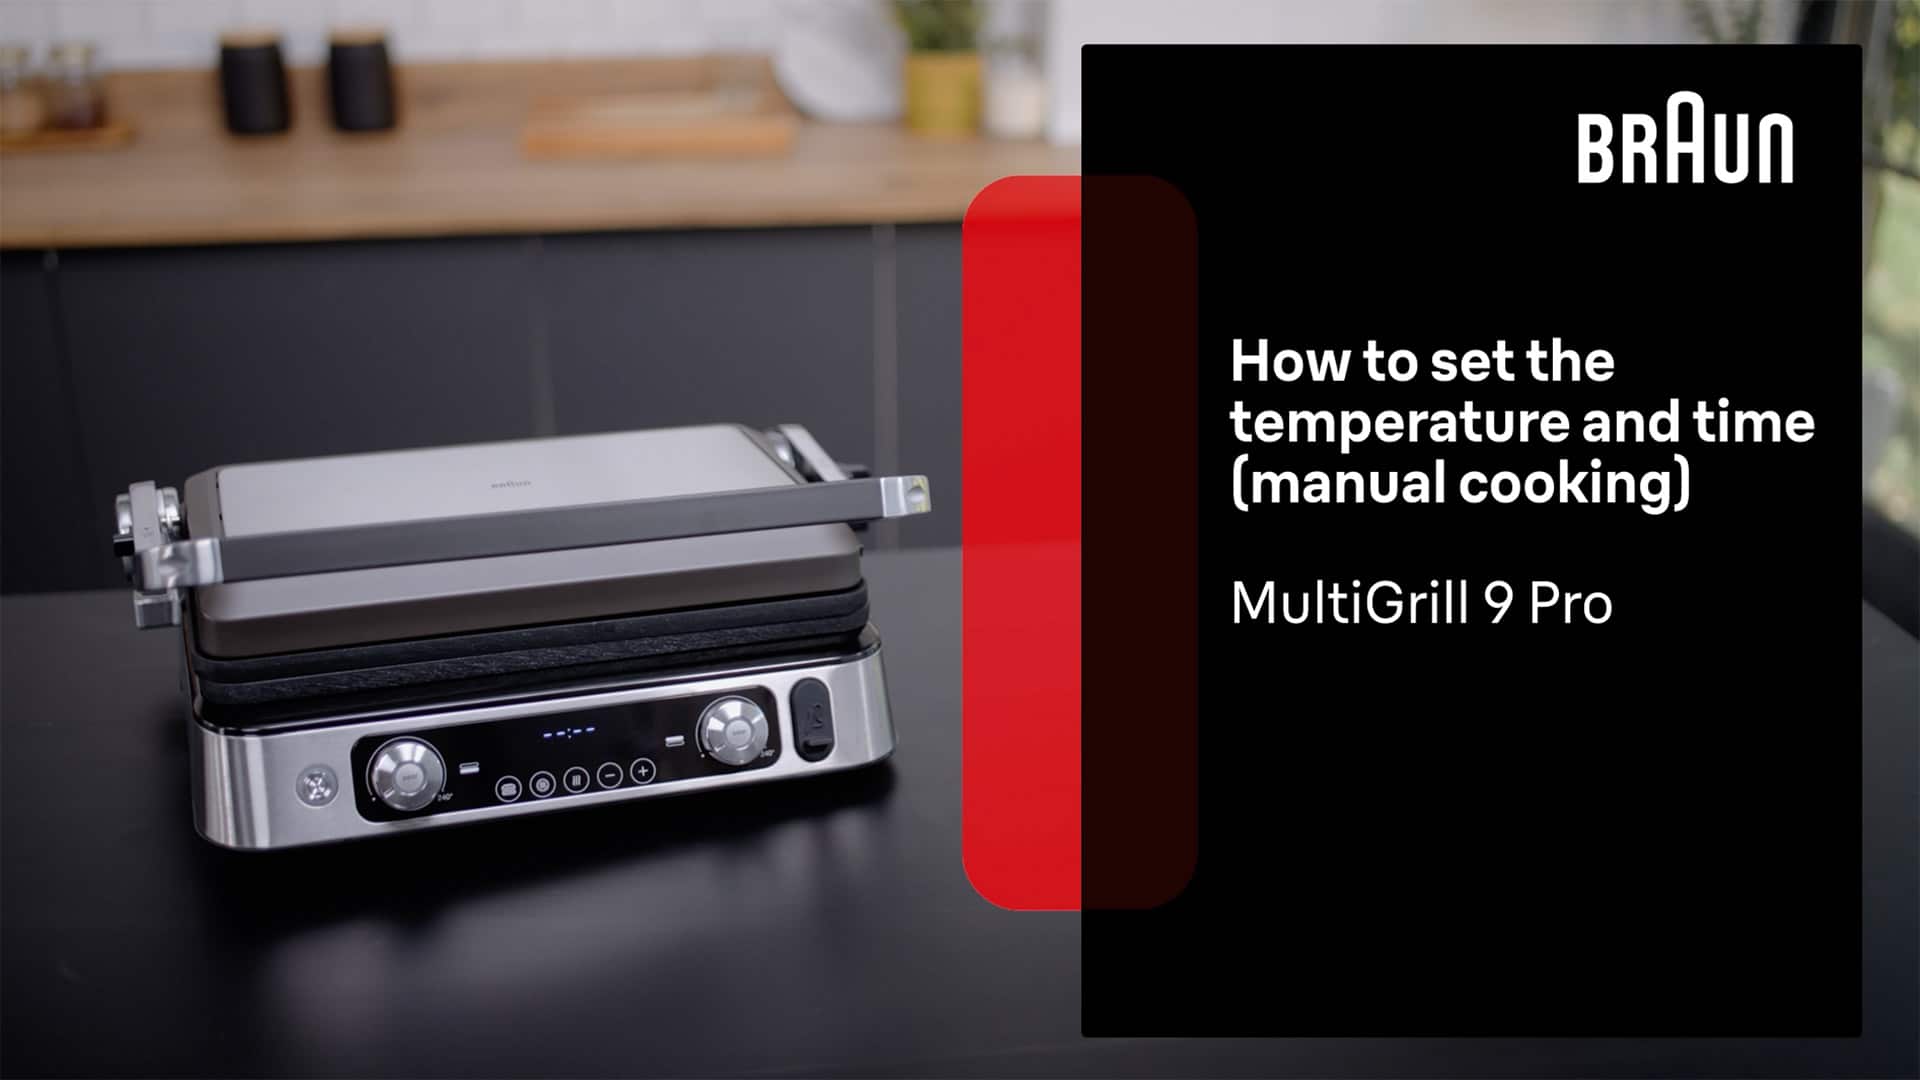 Braun MultiGrill 9 Pro | How to Set the Temperature and Time (Manual Cooking)